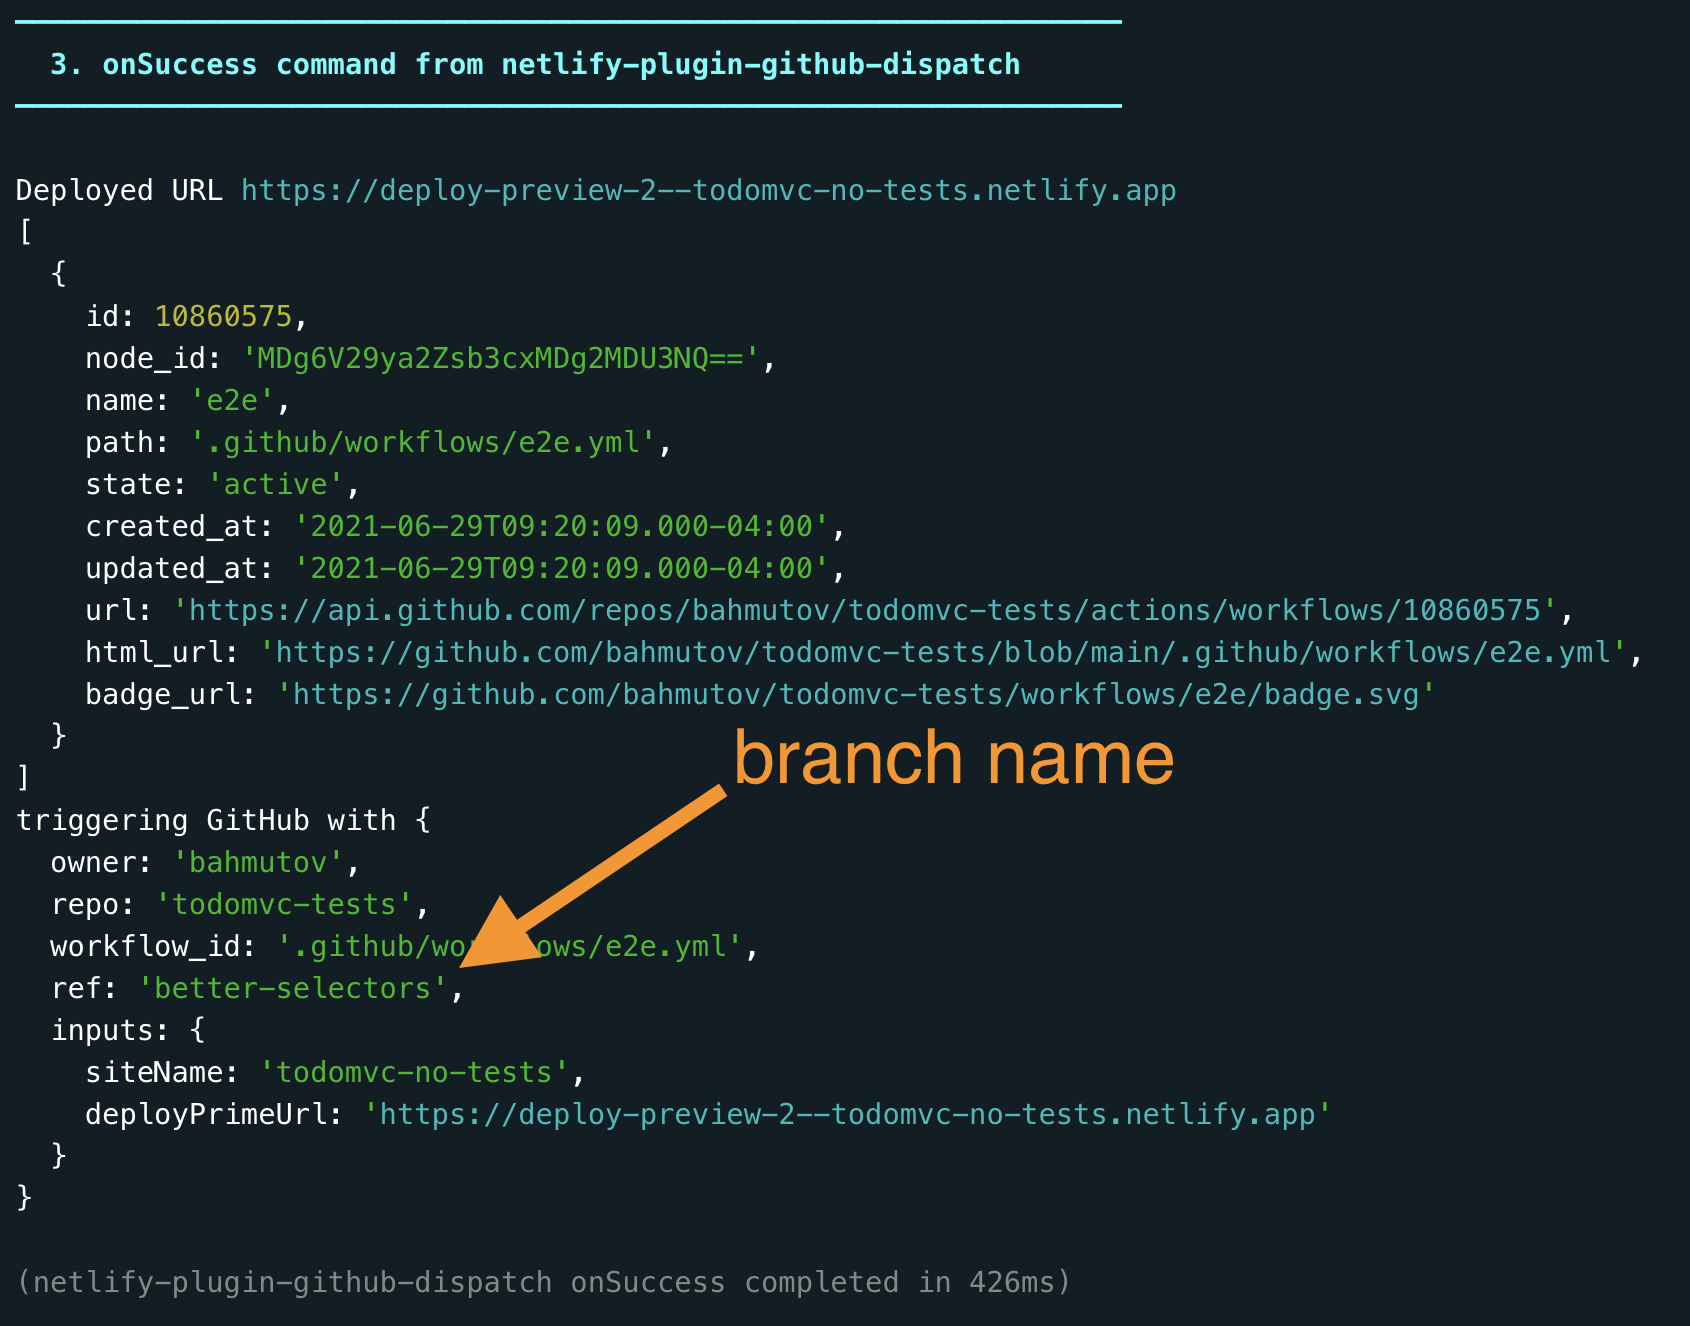 The dispatch triggers workflow using "better-selectors" branch